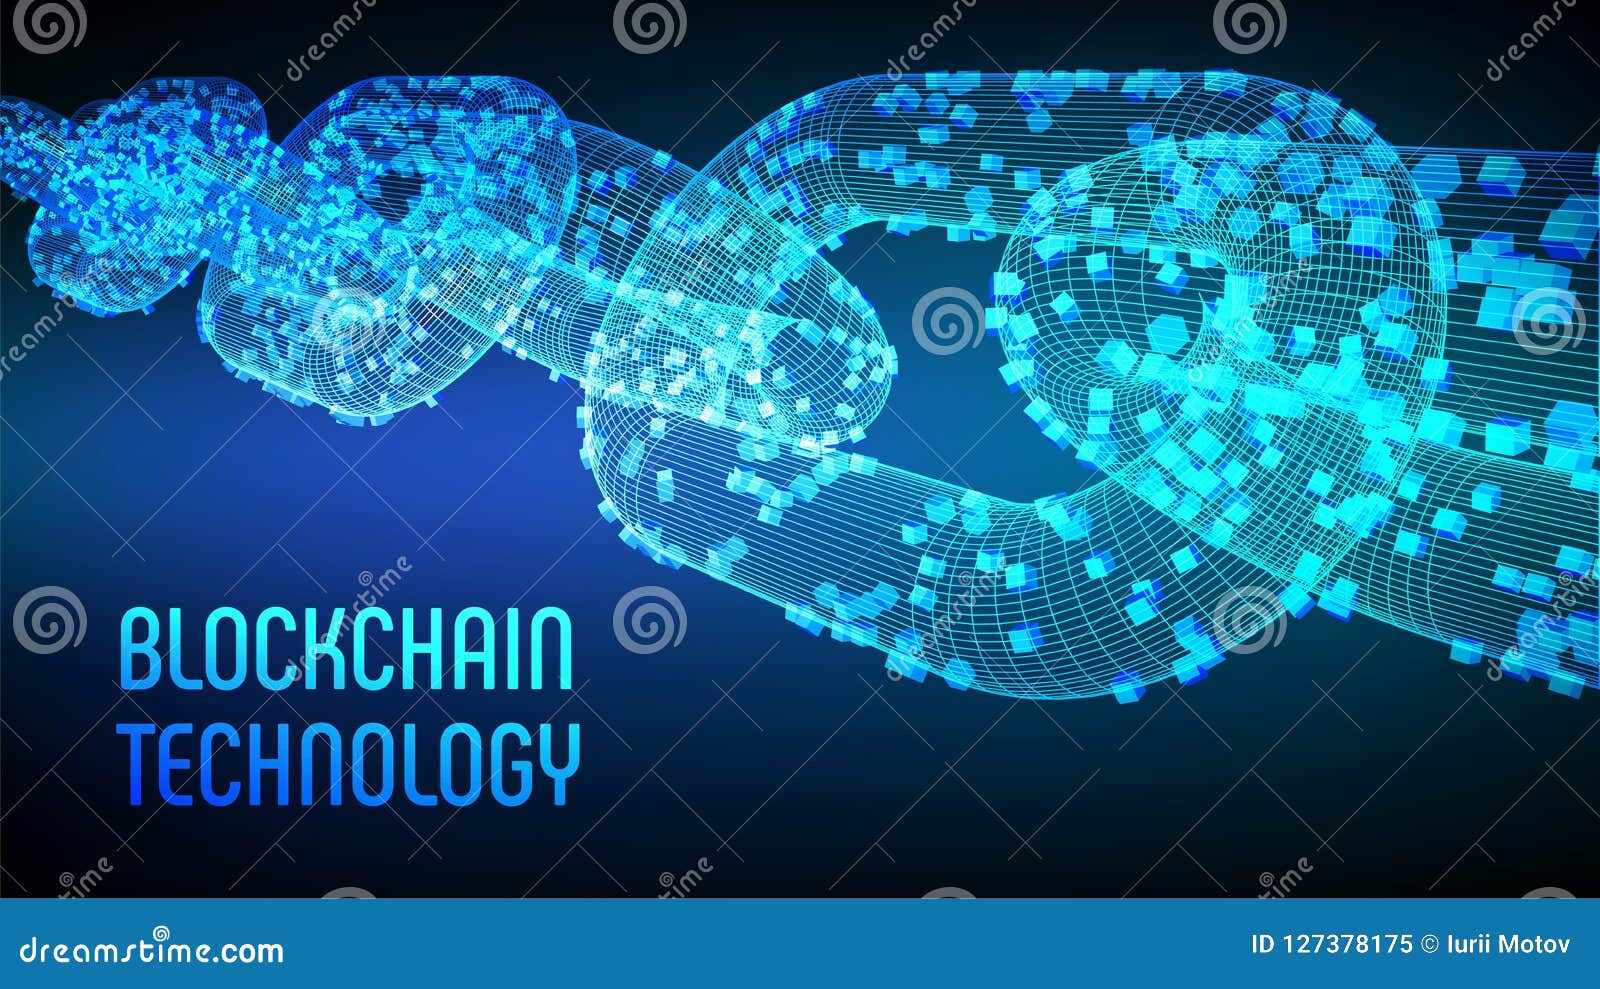 blogs on block chain and crypto-currency